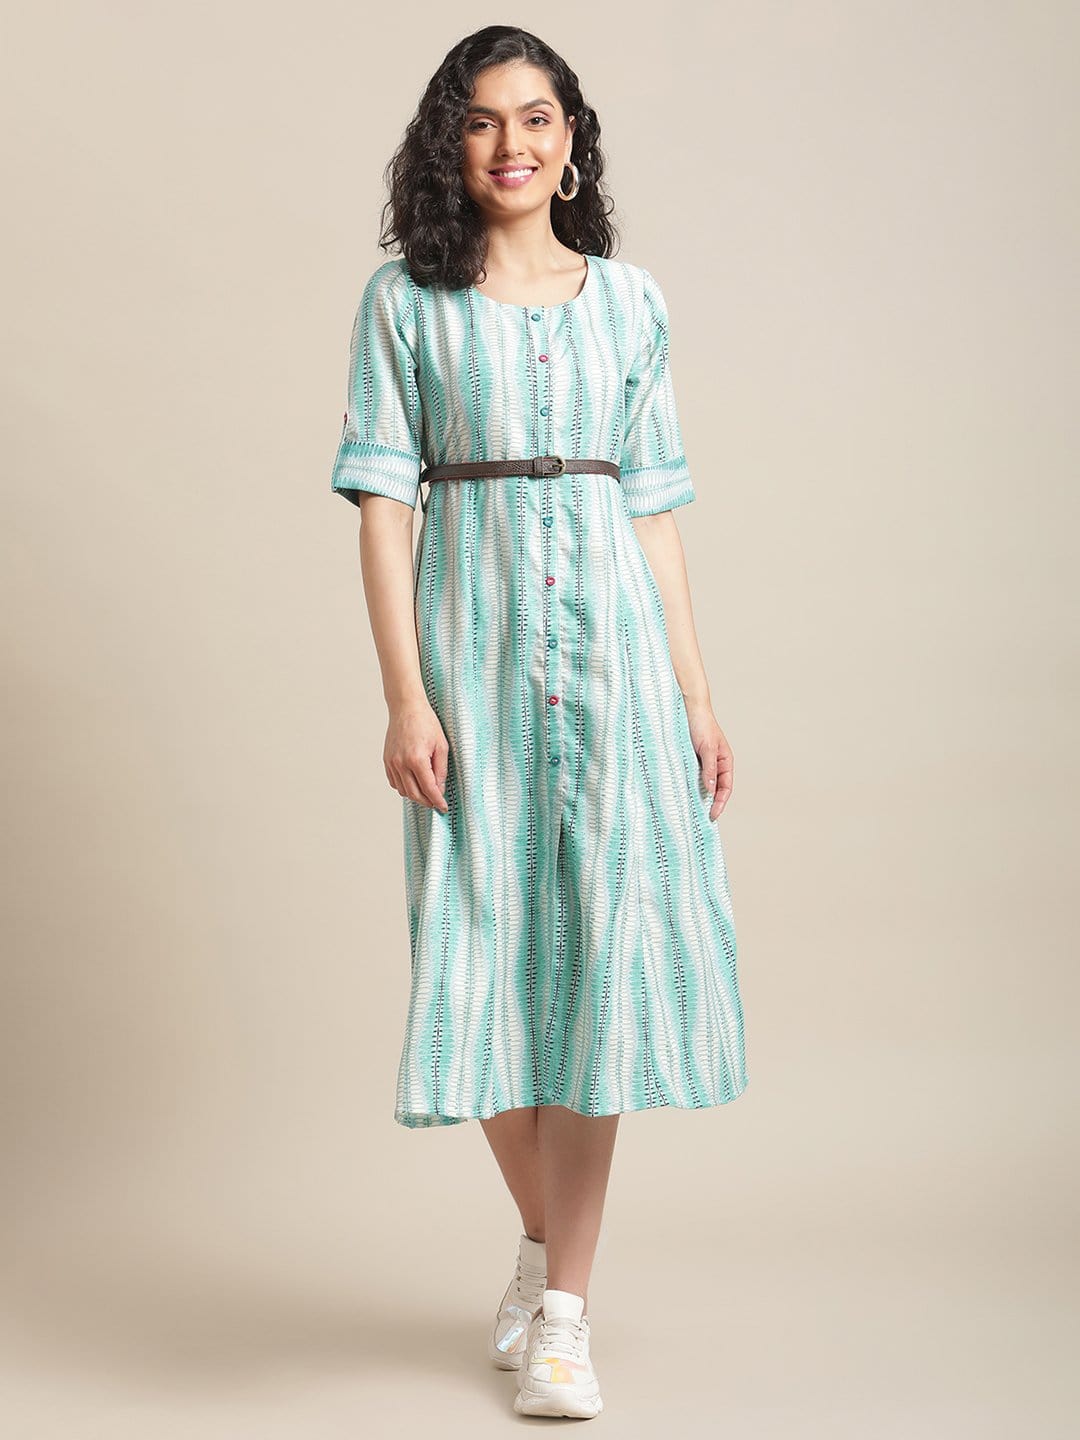 Women's Off-White And Blue Abstract Printed Panelled Kurta With Loops And Leather Belt - Varanga